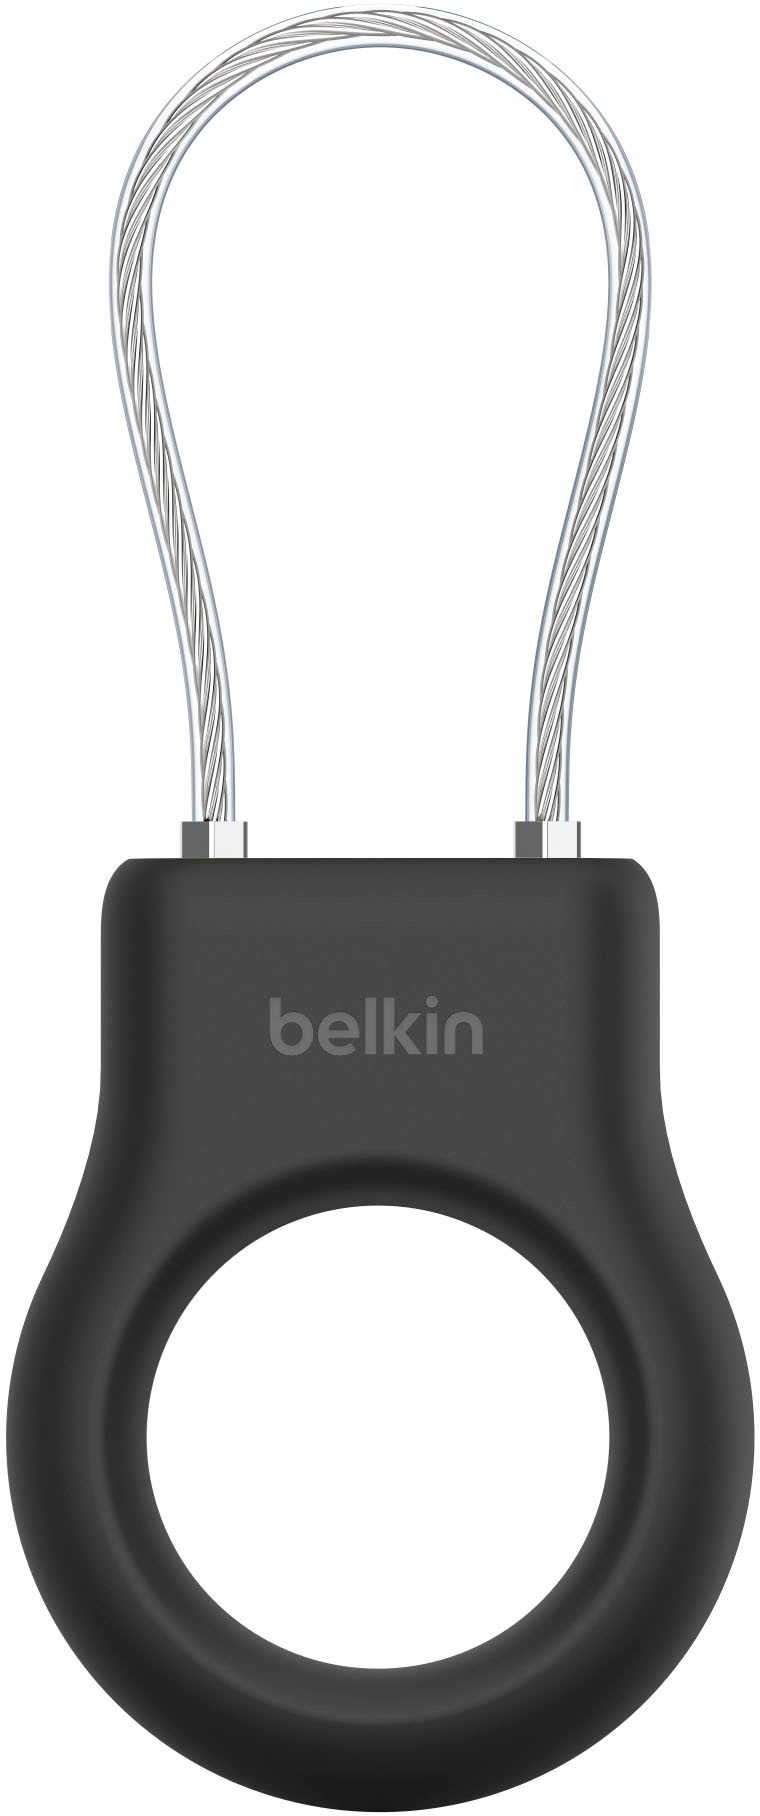 Belkin's new Secure Holder for Apple's AirTag is now available - Tech Guide